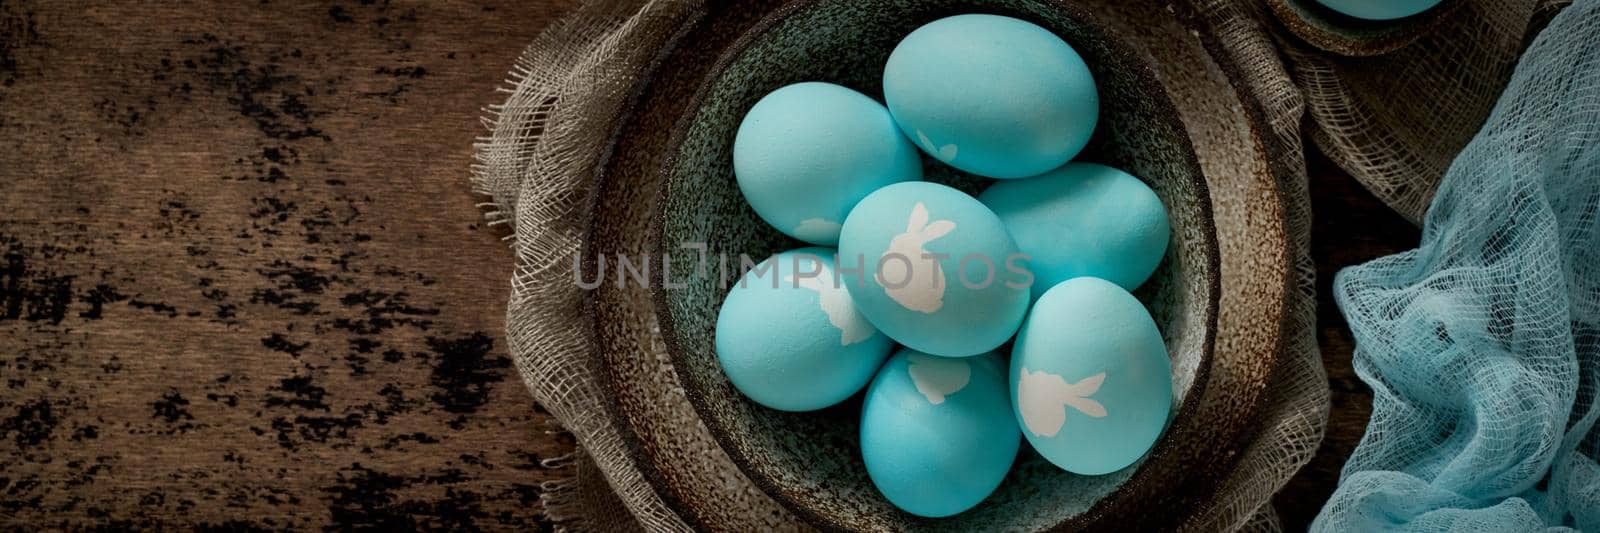 Banner with unusual Easter on dark old background. Ceramic brown bowl with blue eggs with rabbit. by NataBene